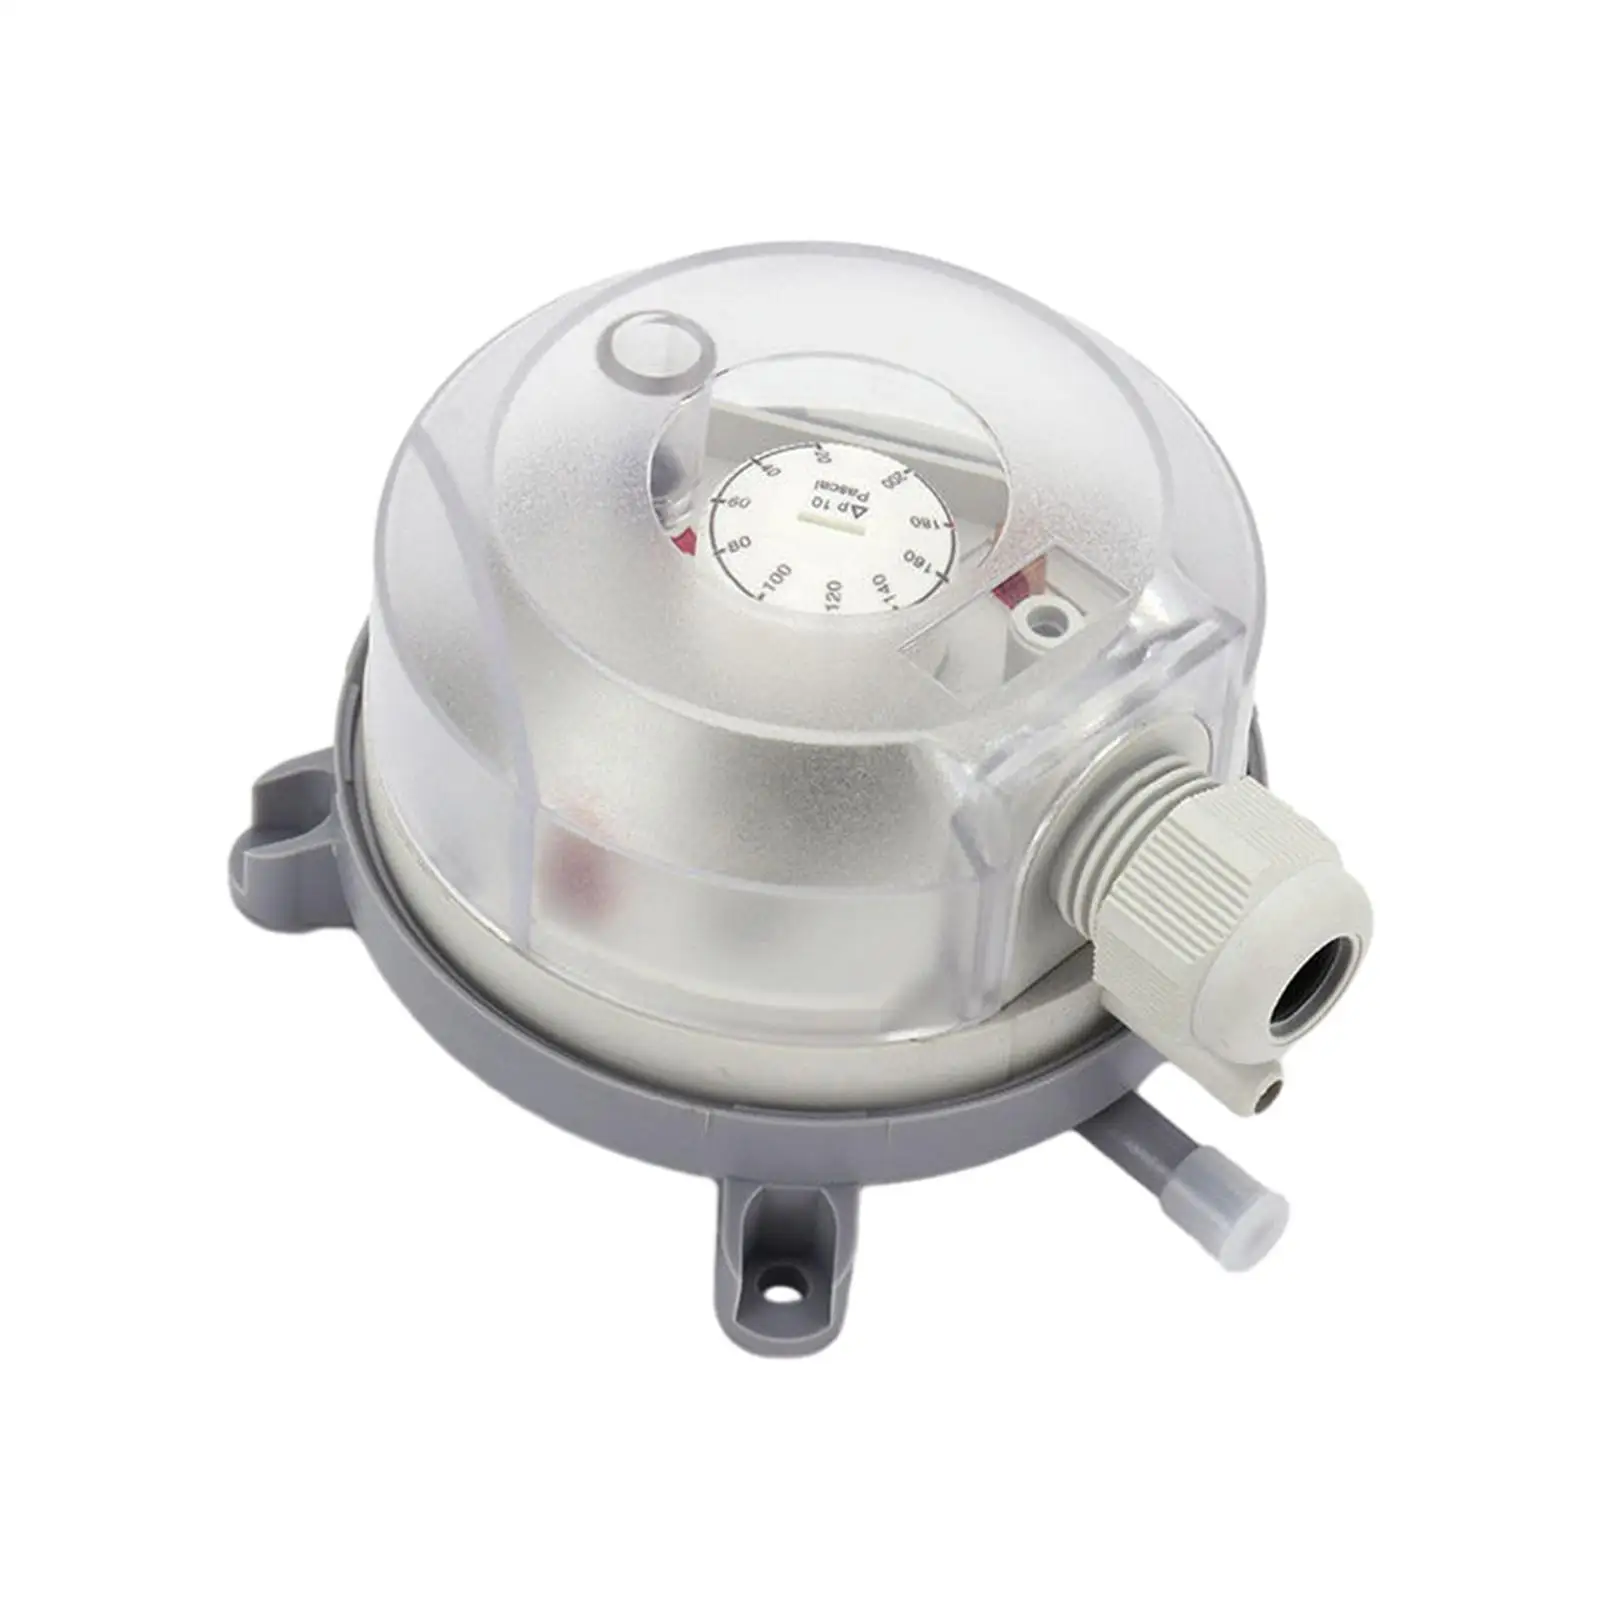 Differential Pressure Switch Pressure Air Switch 20-200PA Air Pressure Sensor for Environmental Protection Engineering Aerospace